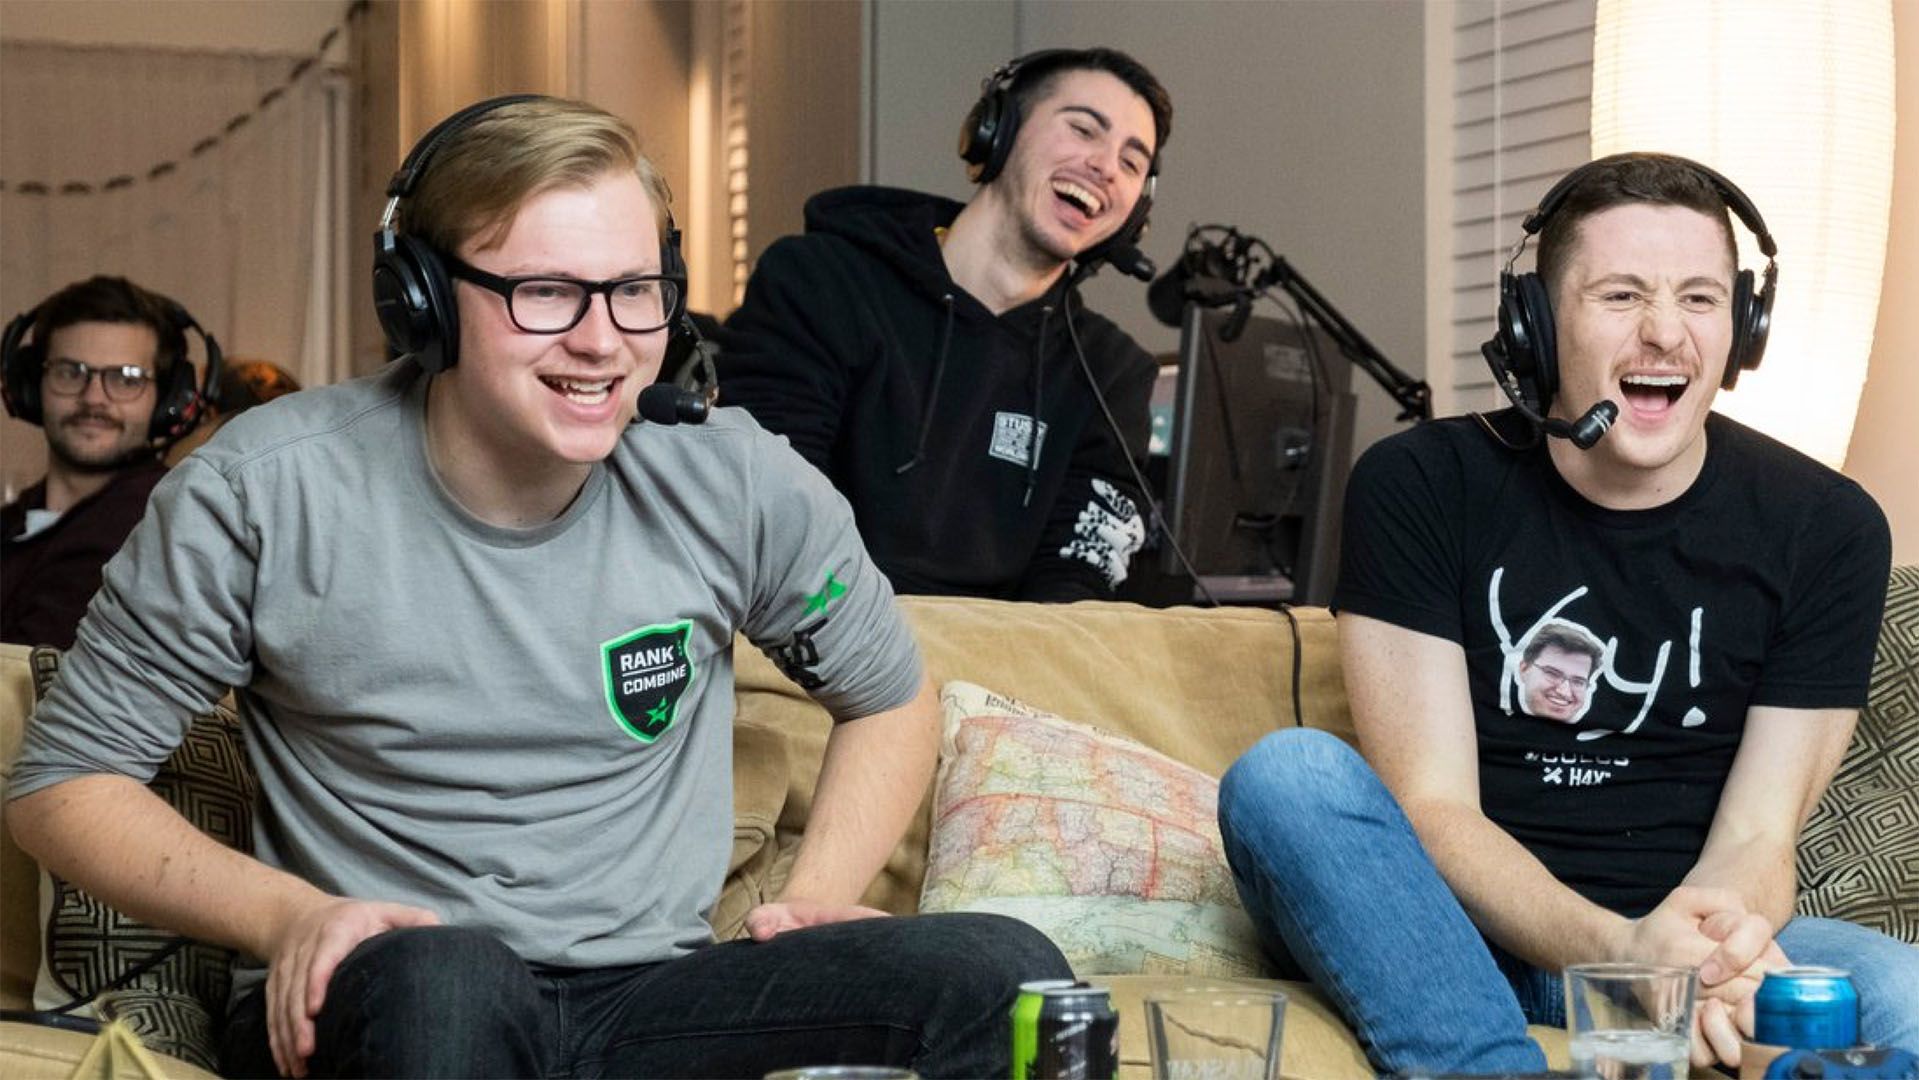 Photo of excited gamers on a couch, enthusiastically getting into a live stream for Movember.